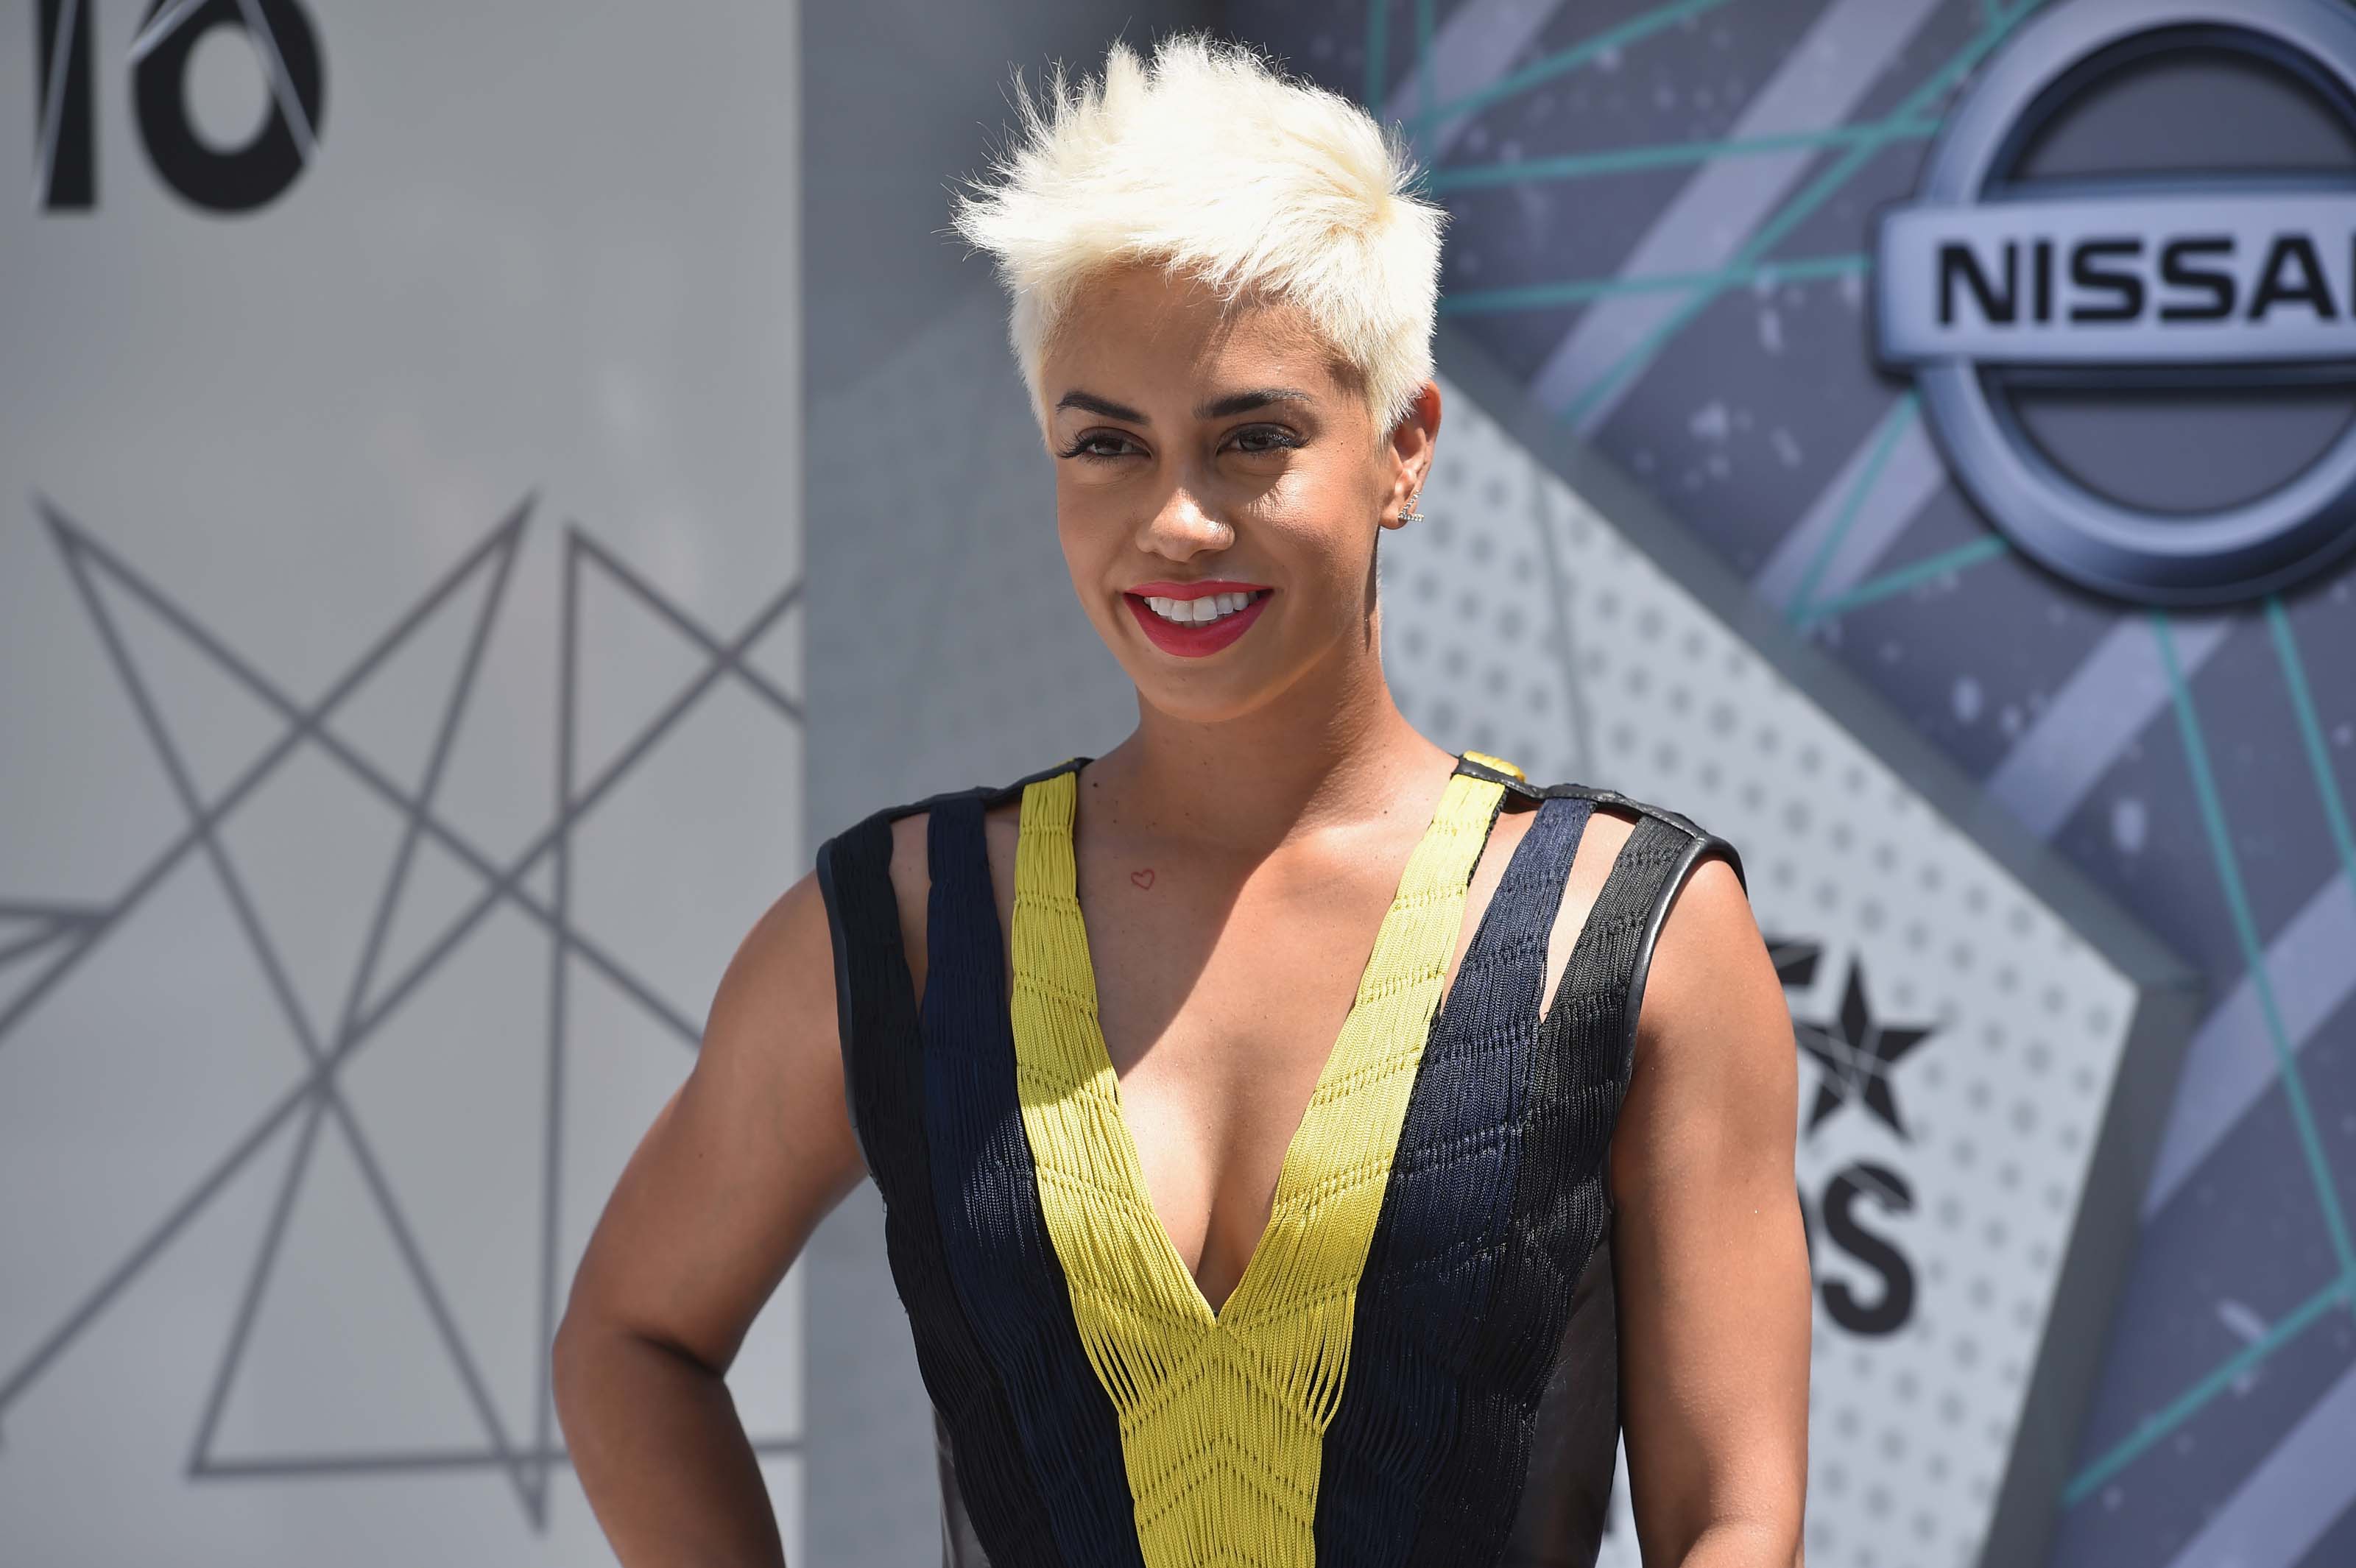 Sibley Scoles attends the 2016 BET Awards